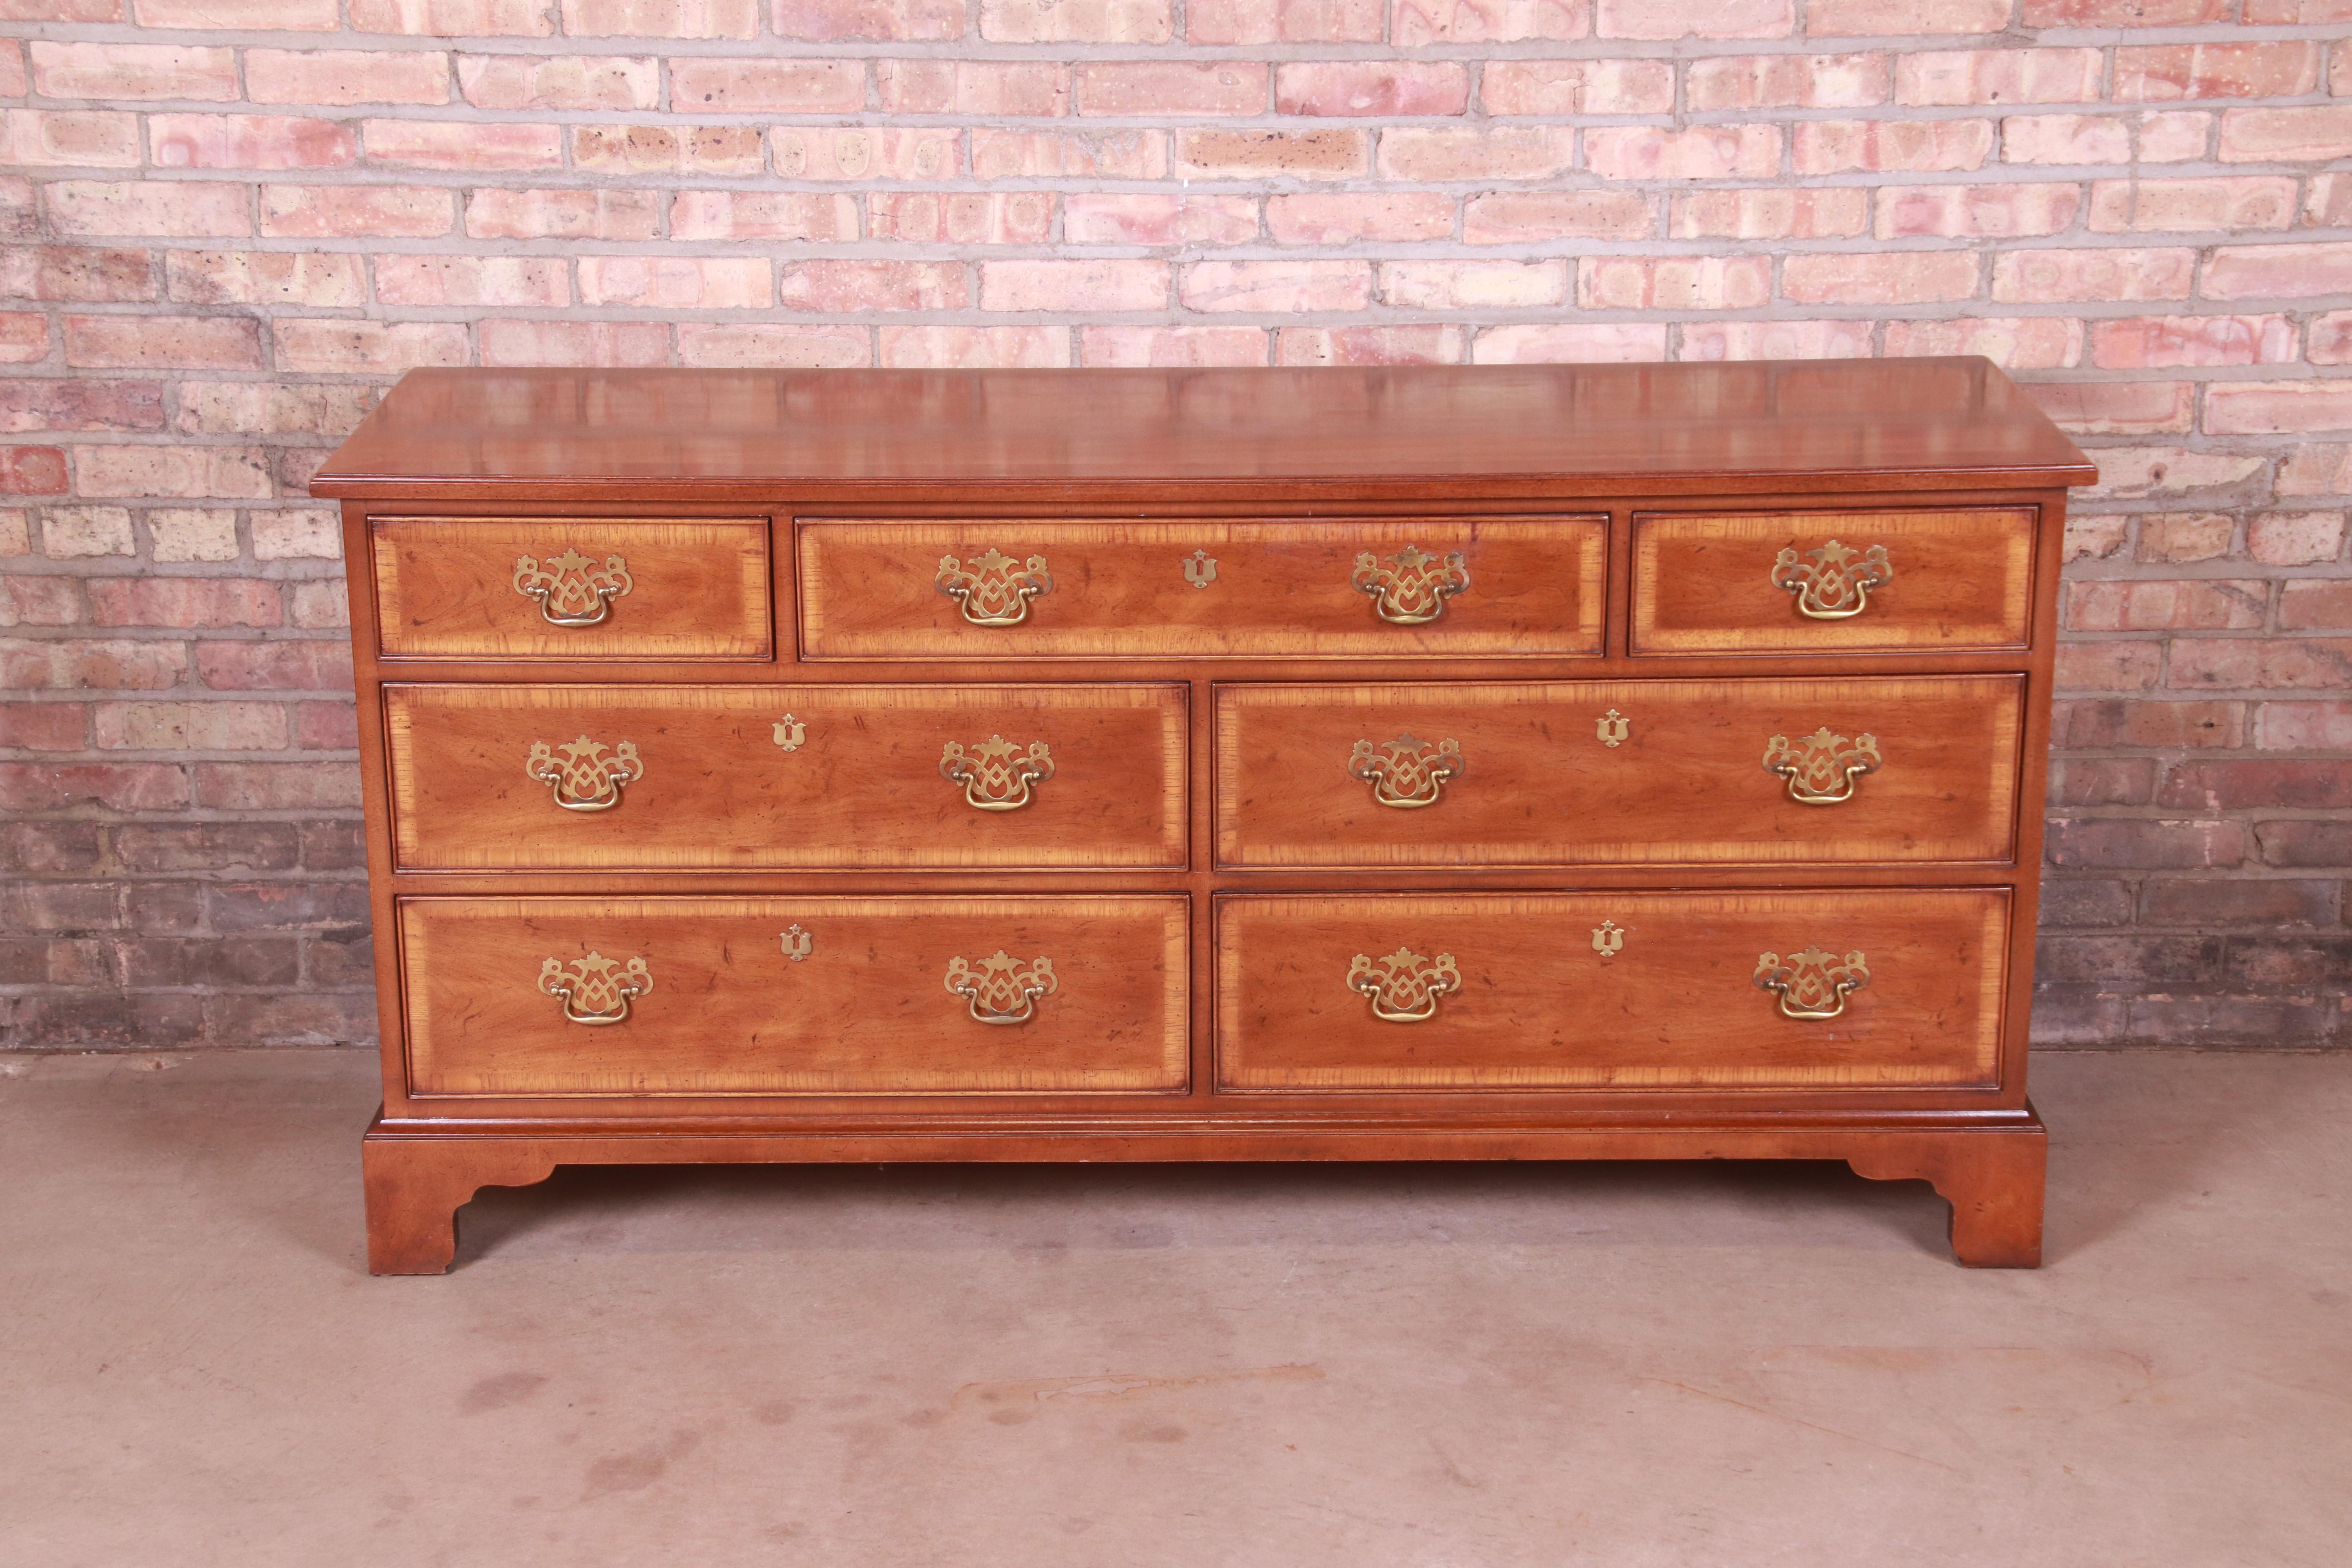 A gorgeous Georgian or Chippendale style seven-drawer dresser or credenza

By Henredon, 